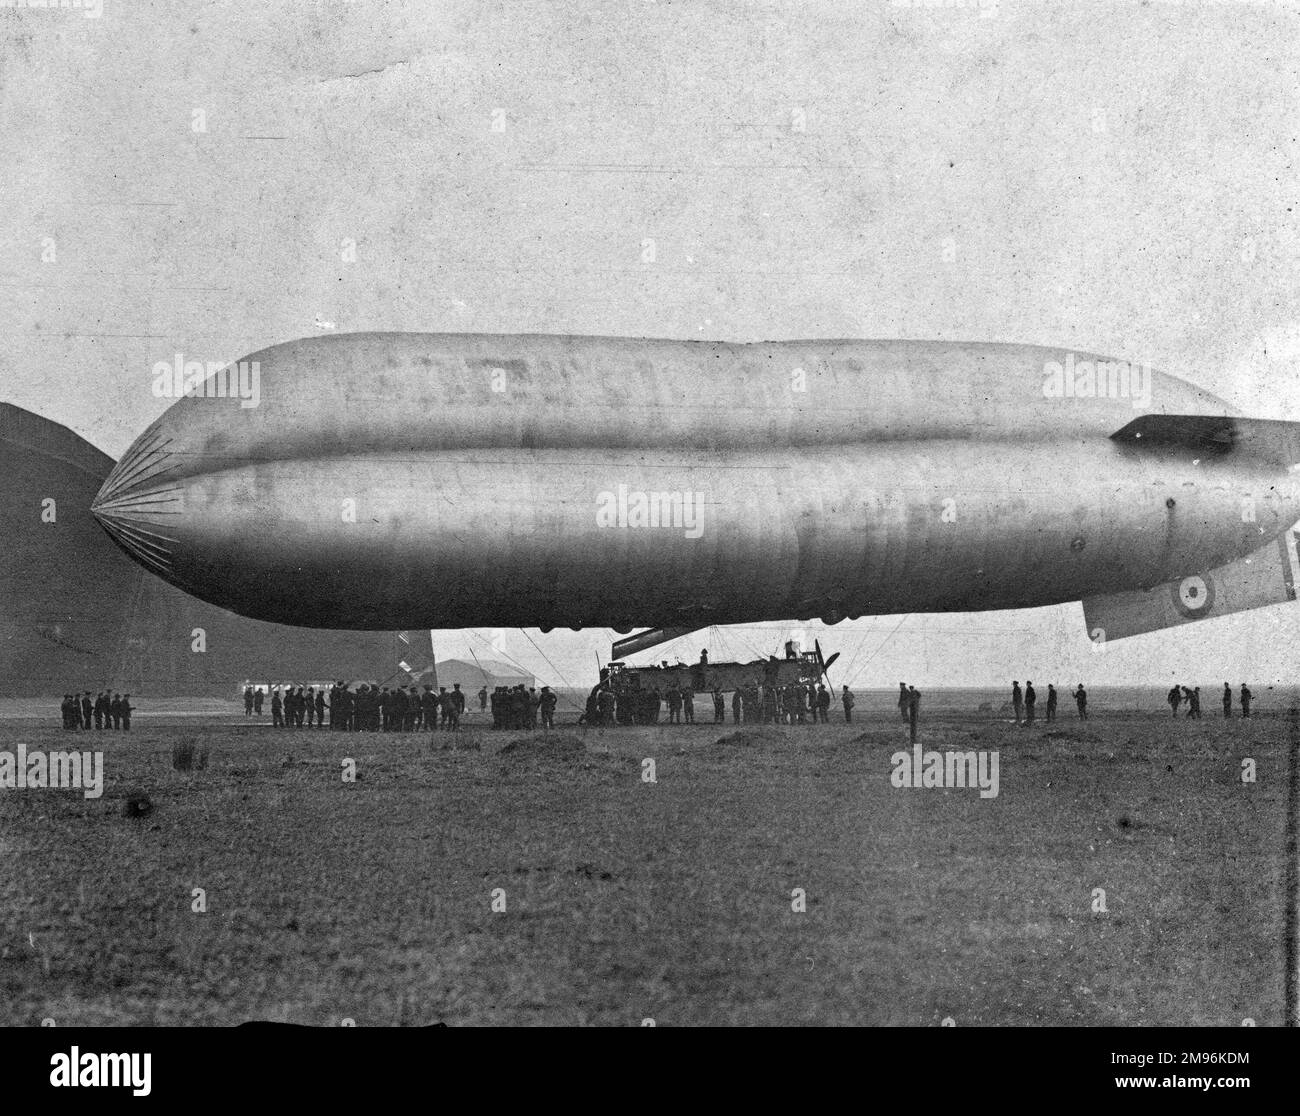 Early British dirigible, seen here on the ground, with crew. Stock Photo